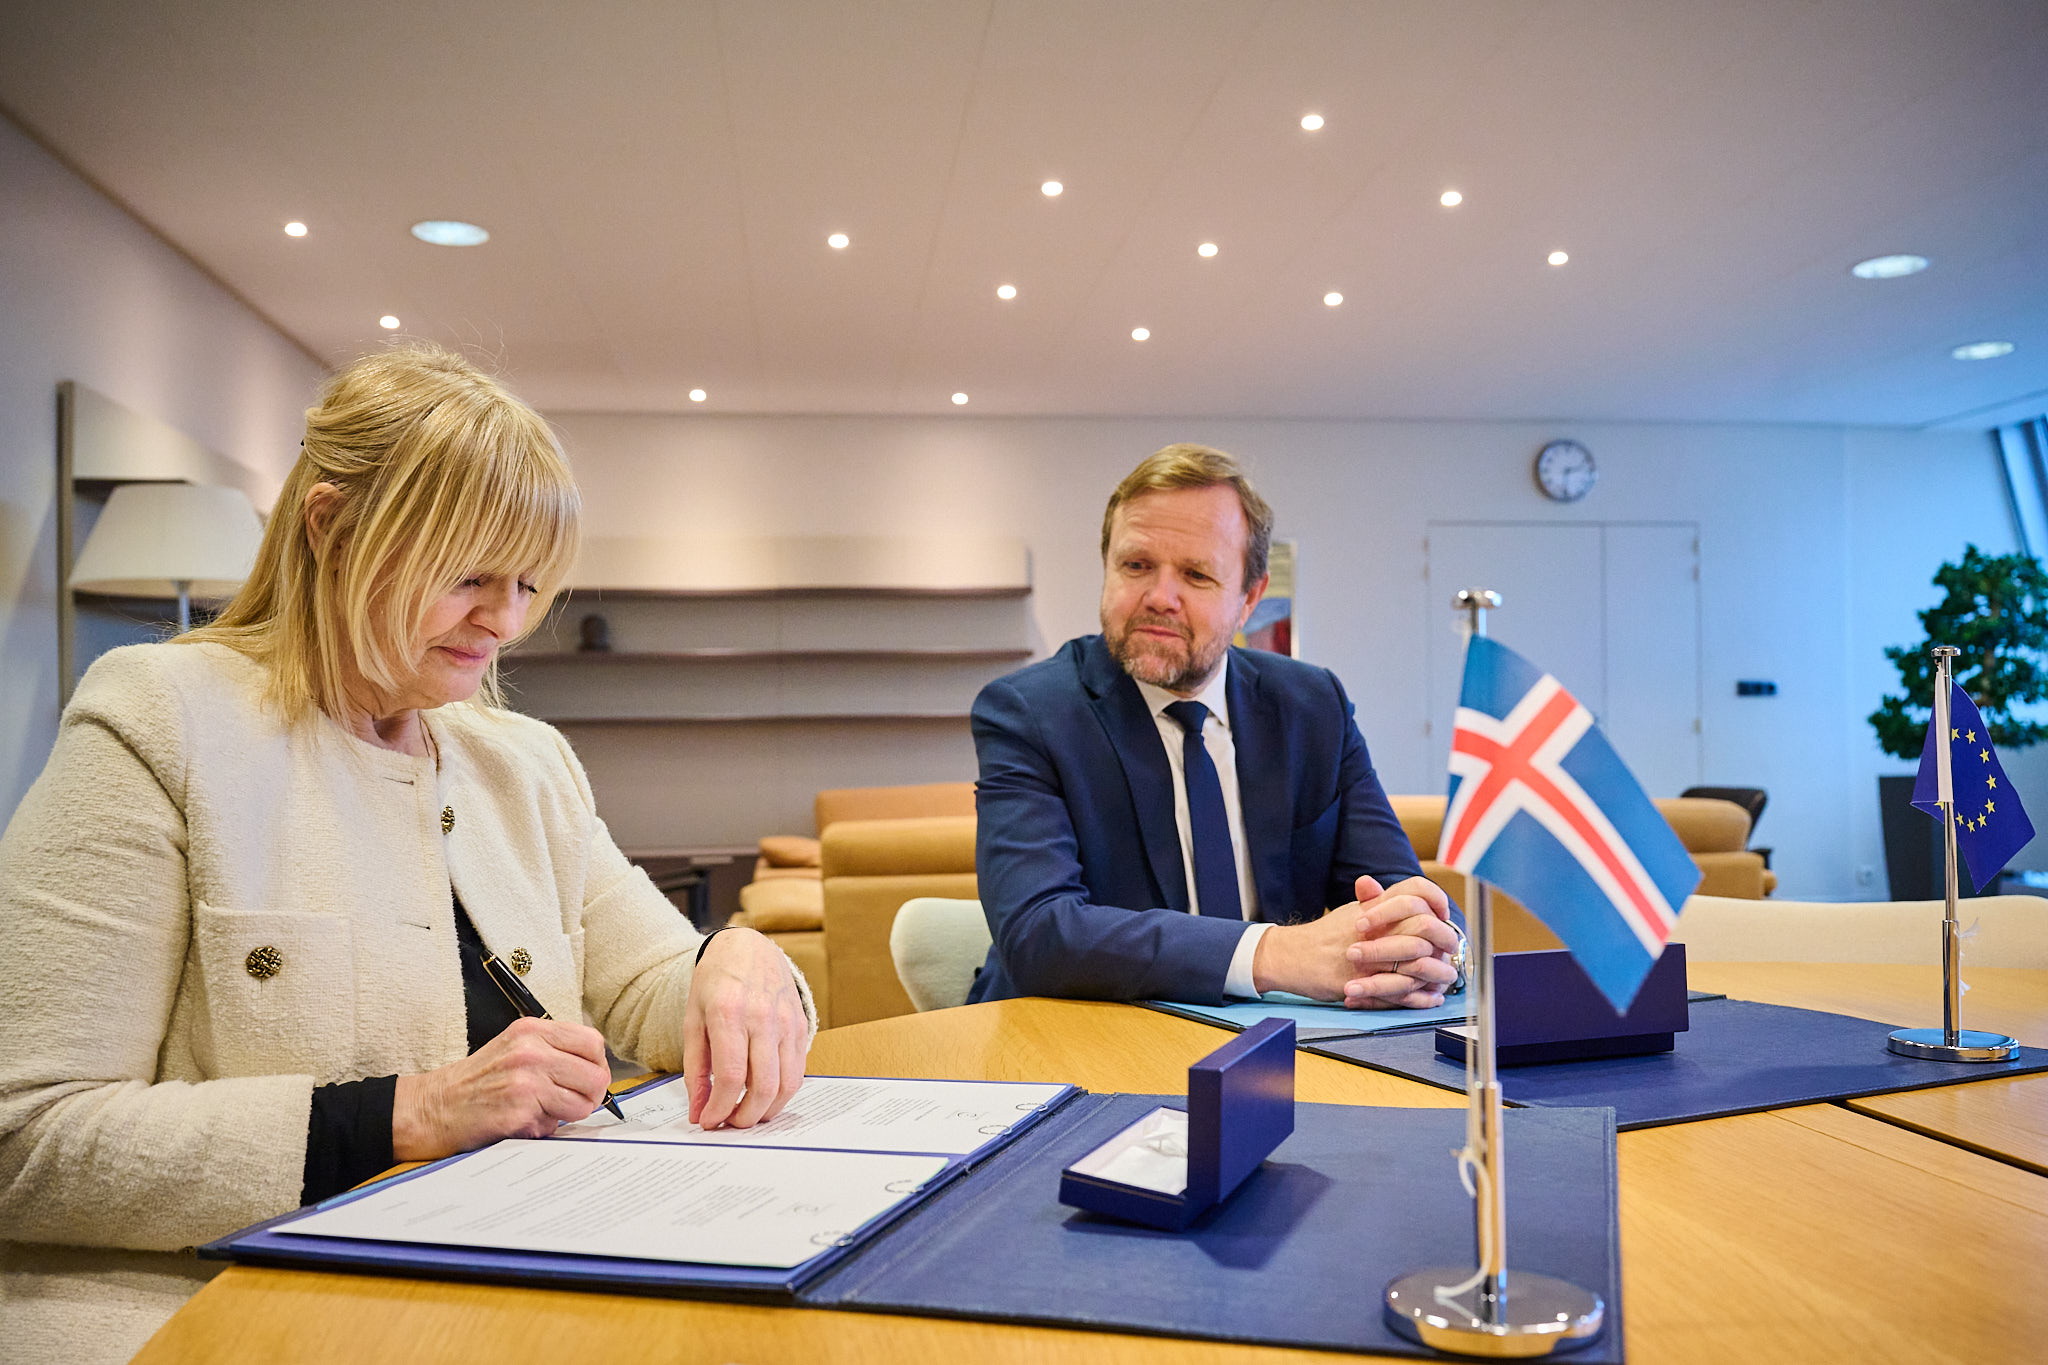 Iceland joins the First Additional Protocol to the Convention on Cybercrime, on countering xenophobic and racist acts committed through computer systems